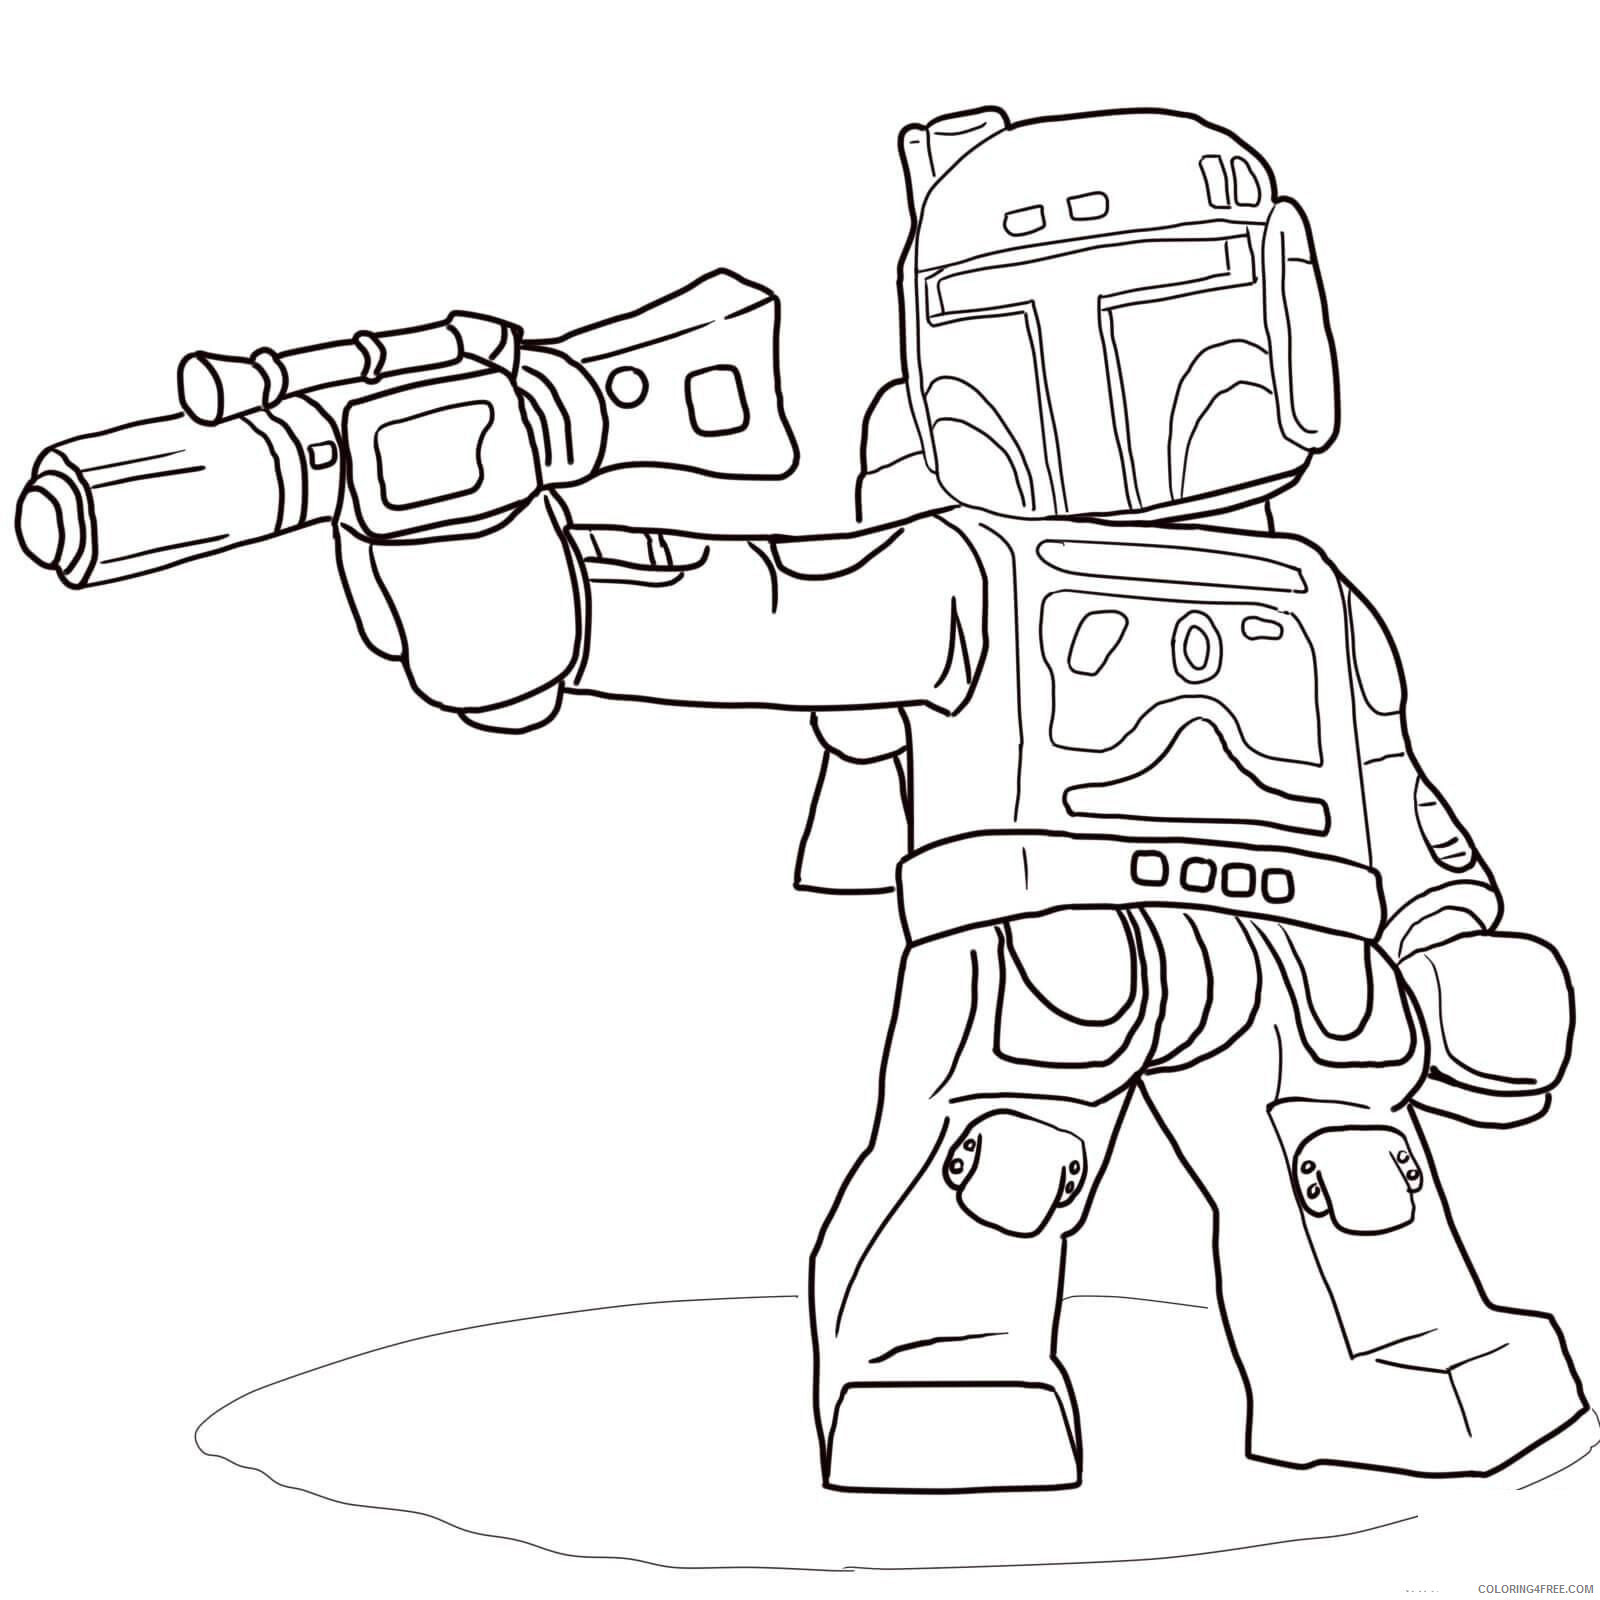 Star Wars Coloring Pages TV Film Boba Fett Lego Star Wars Printable 2020 07760 Coloring4free